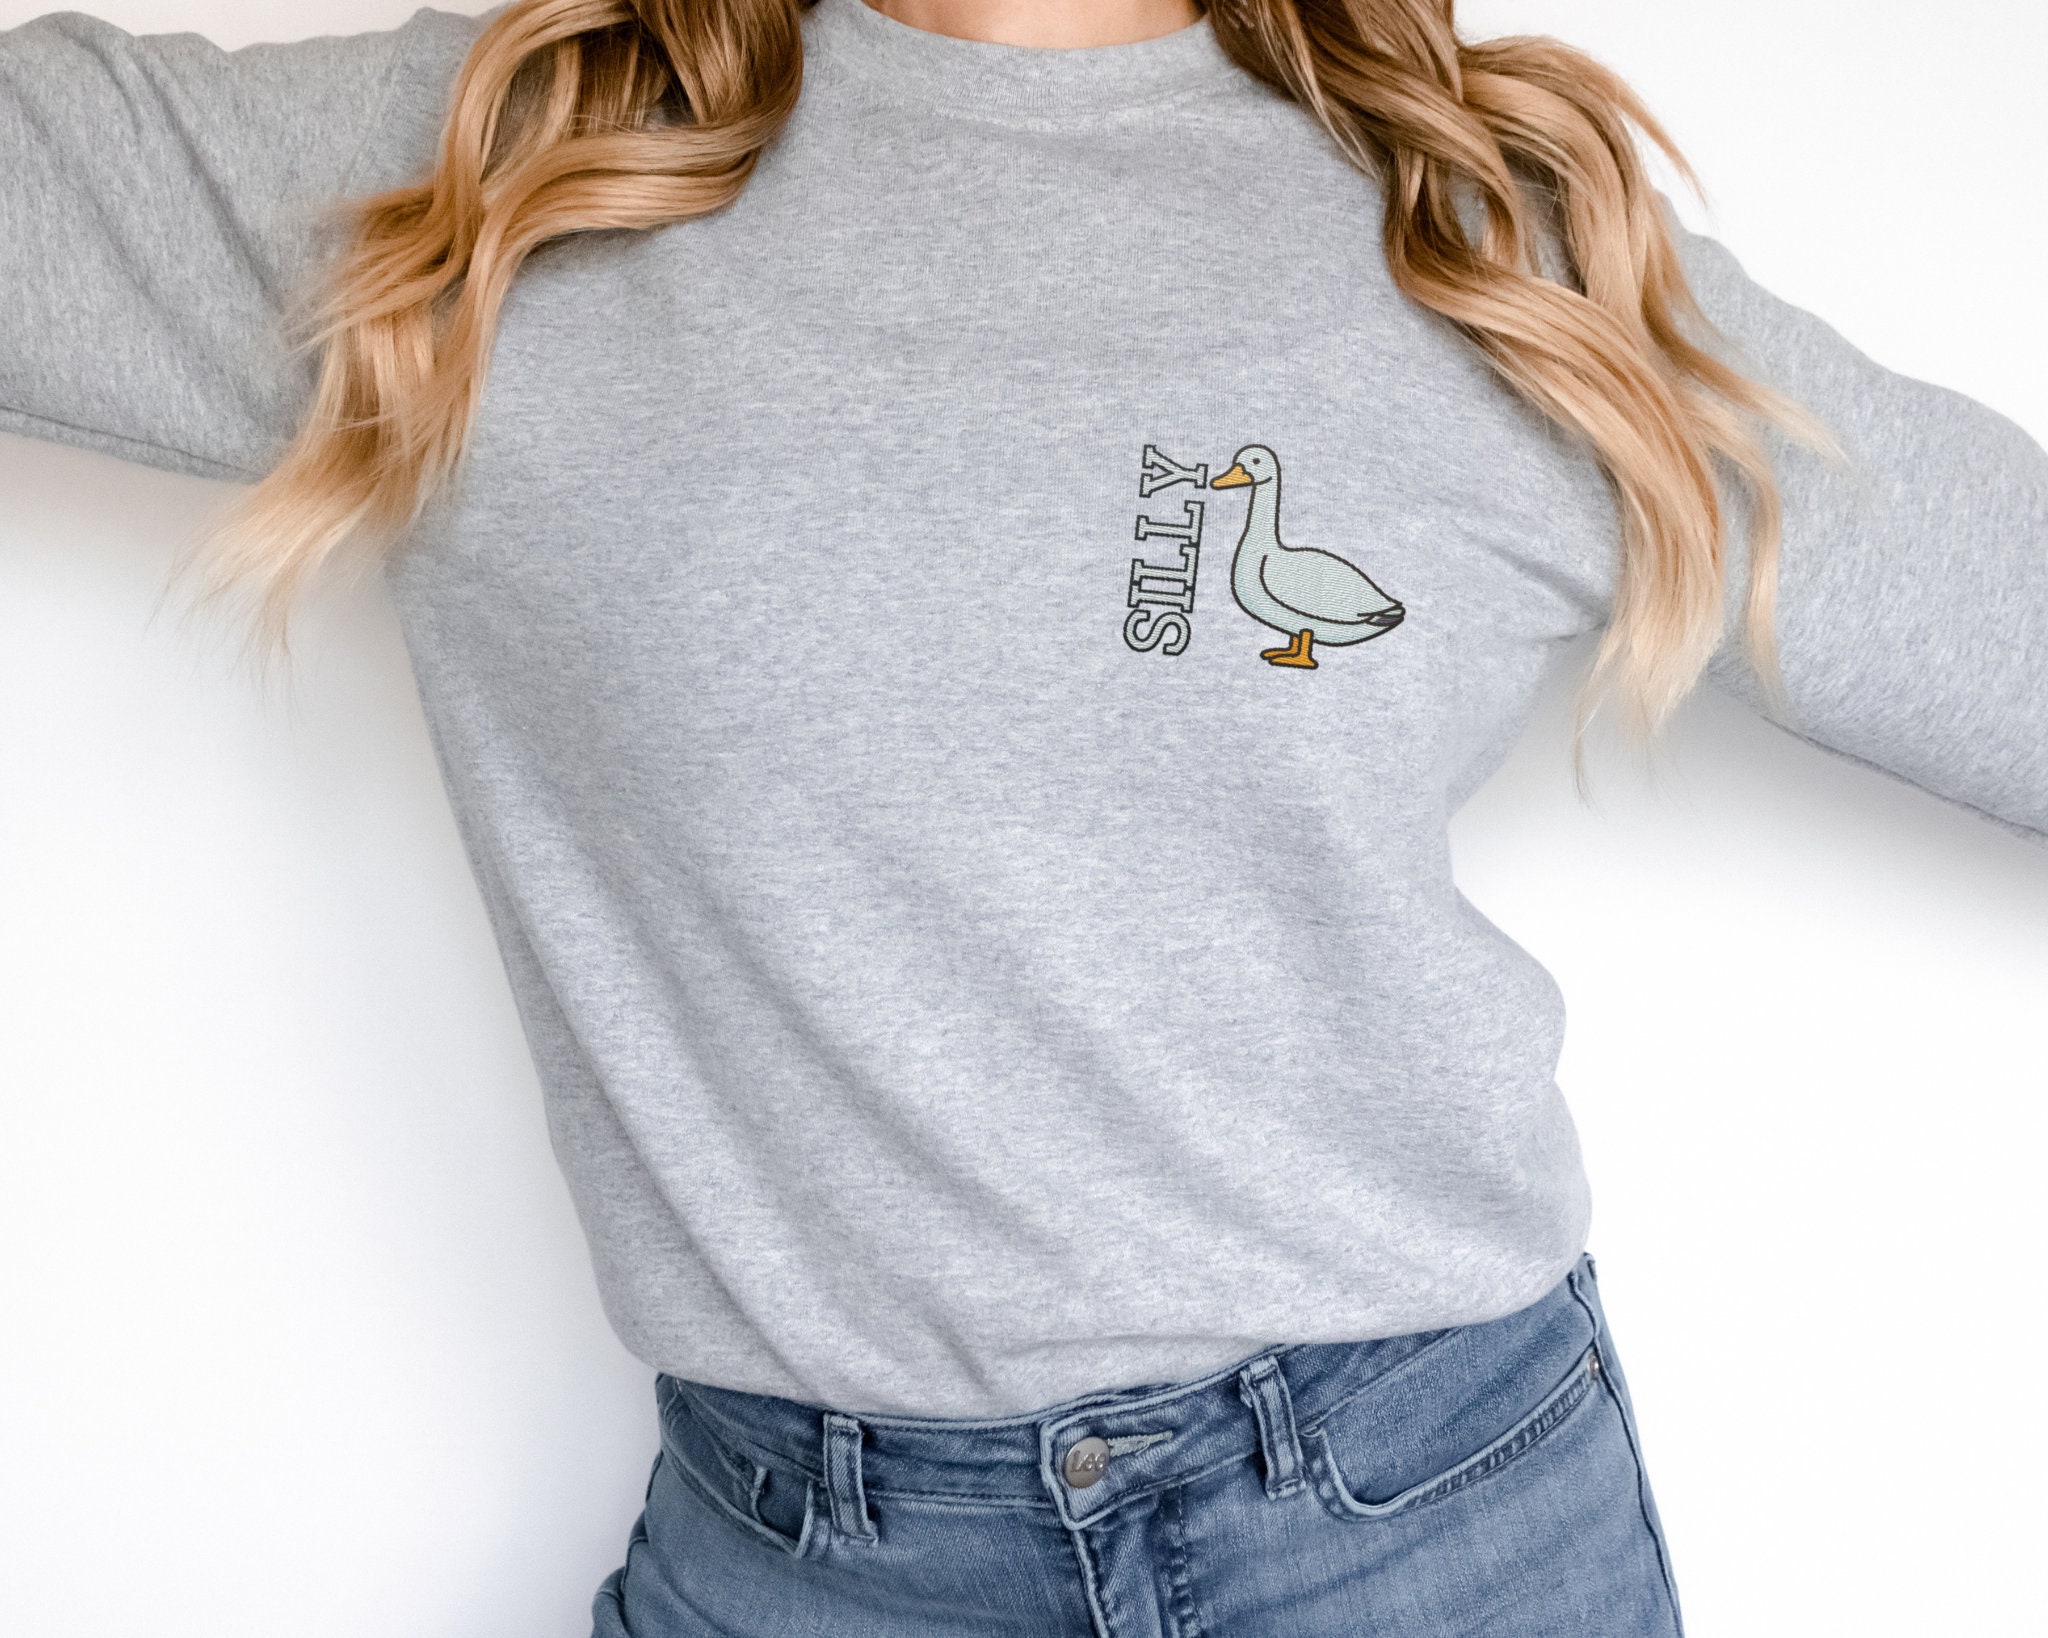 Discover Embroidered Silly Goose Sweatshirt, Silly Goose Crewneck Sweater, Silly Goose Pullover, Embroidered Sweatshirts